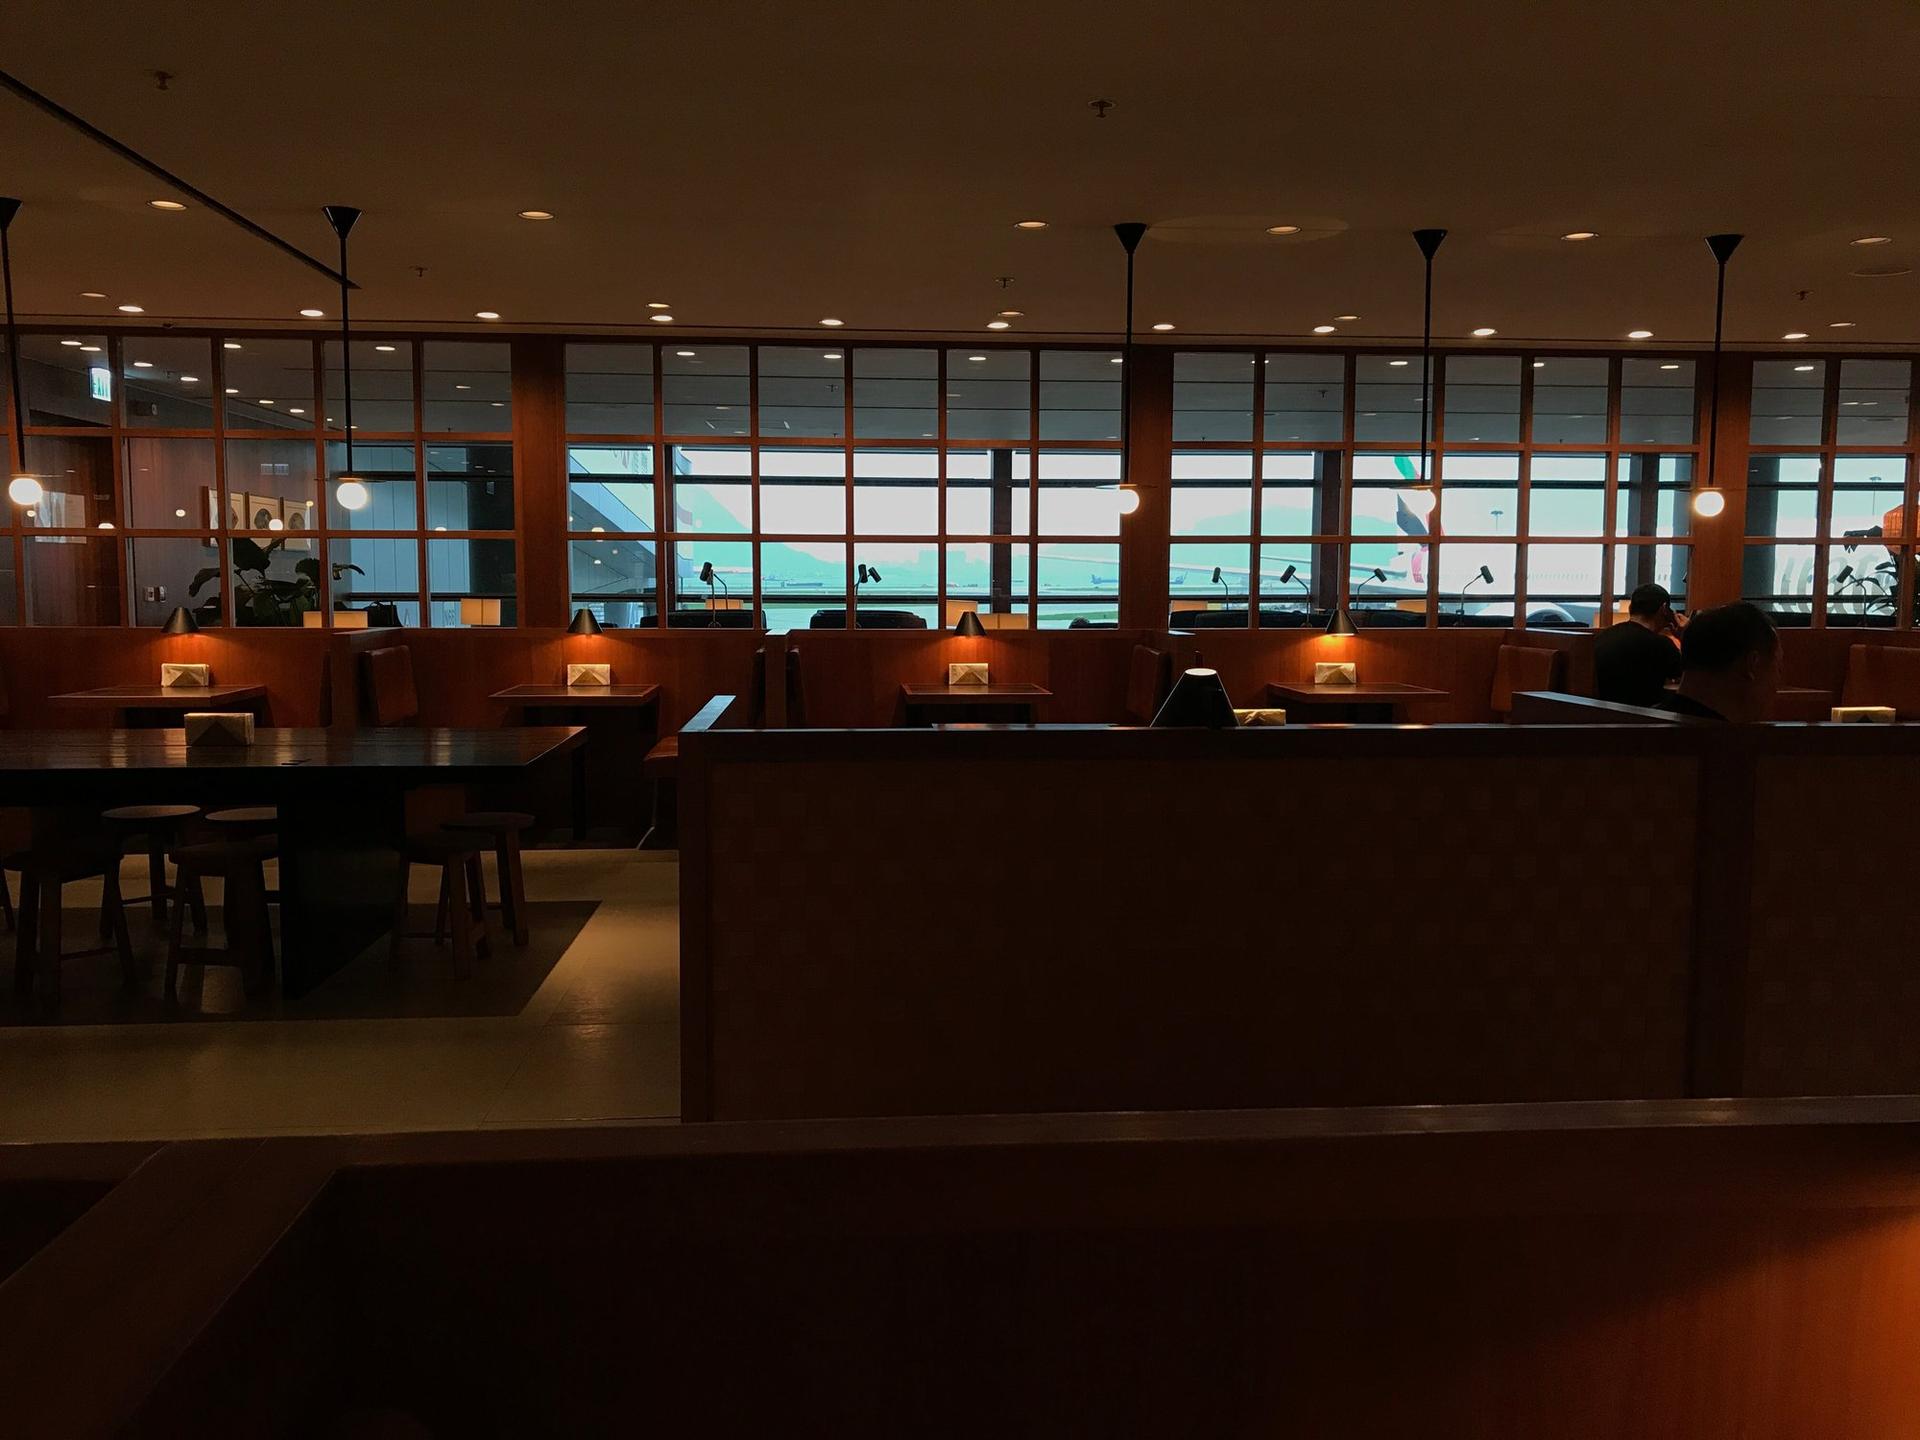 Cathay Pacific The Pier Business Class Lounge image 60 of 61